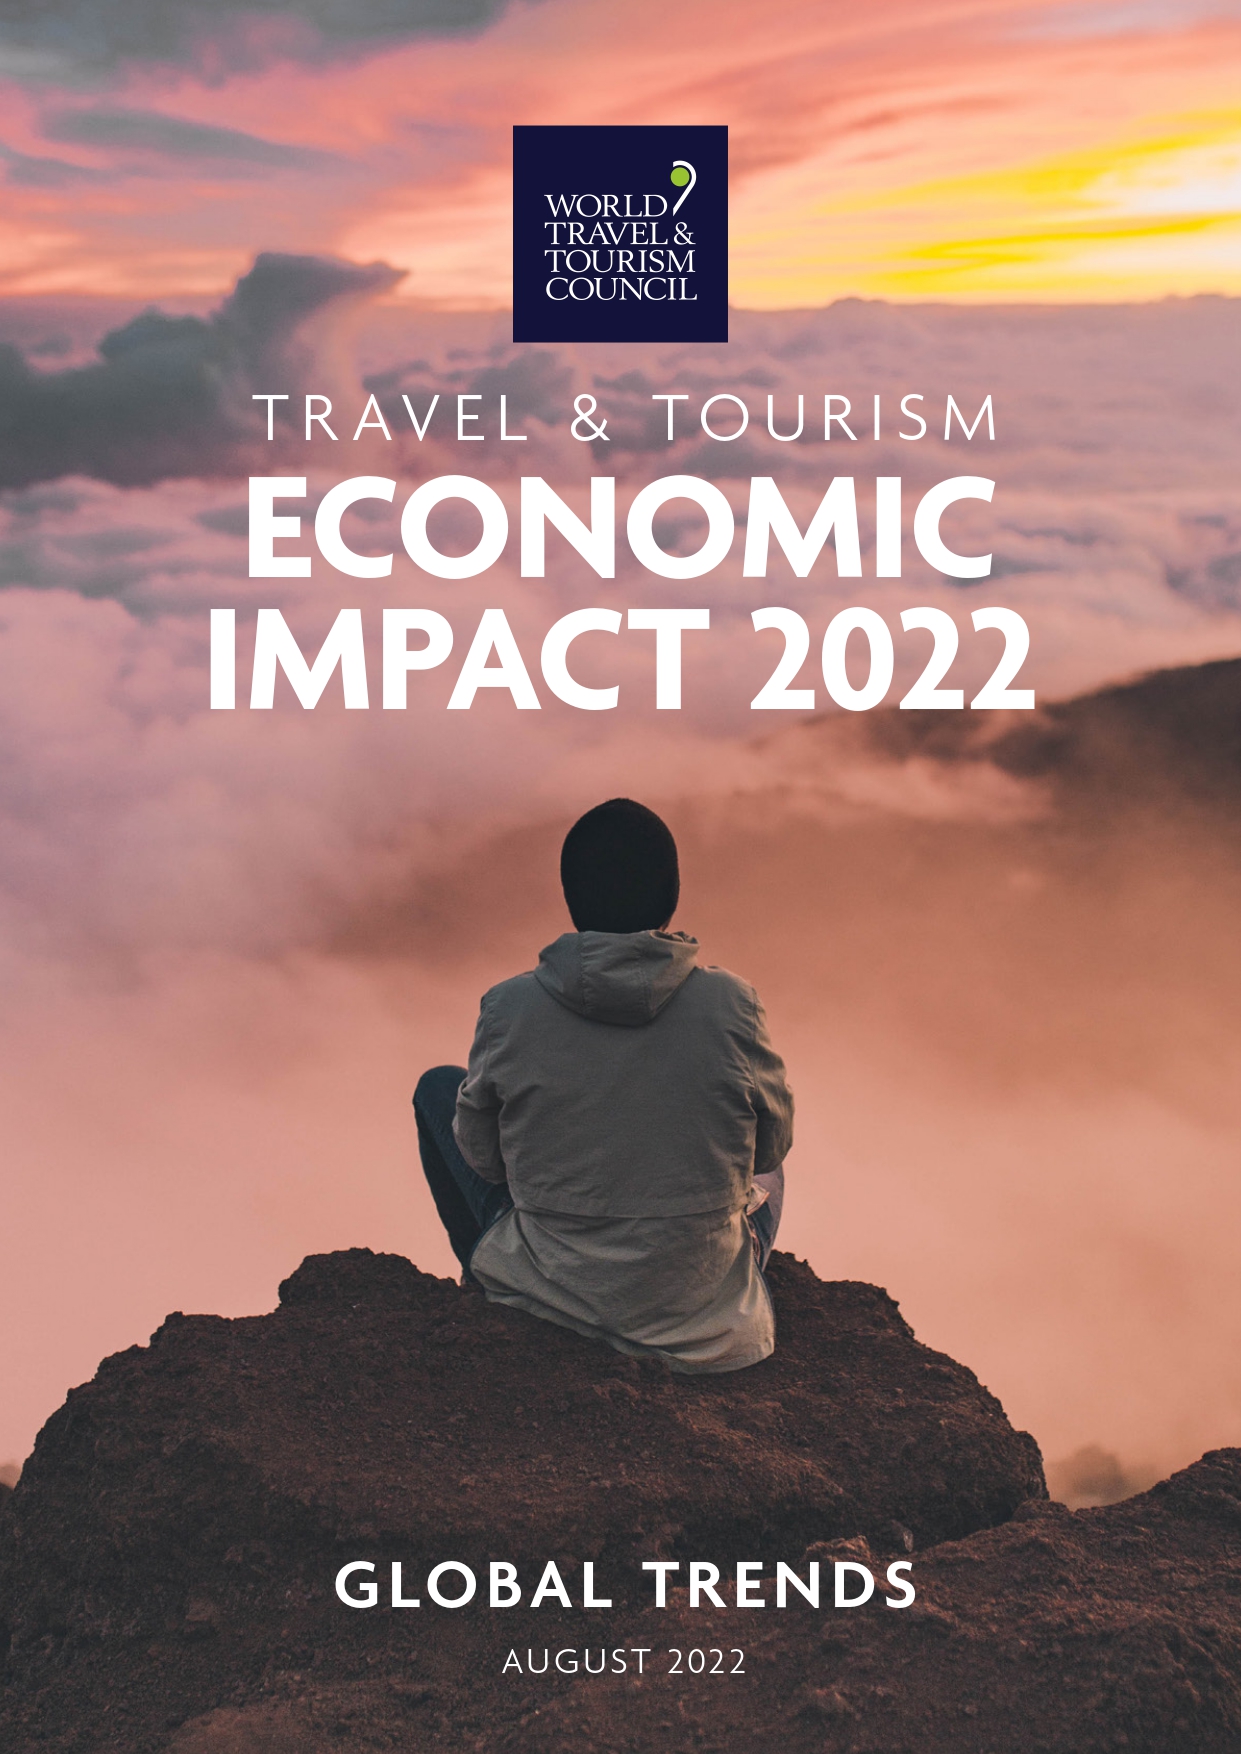 tourism for all 2022